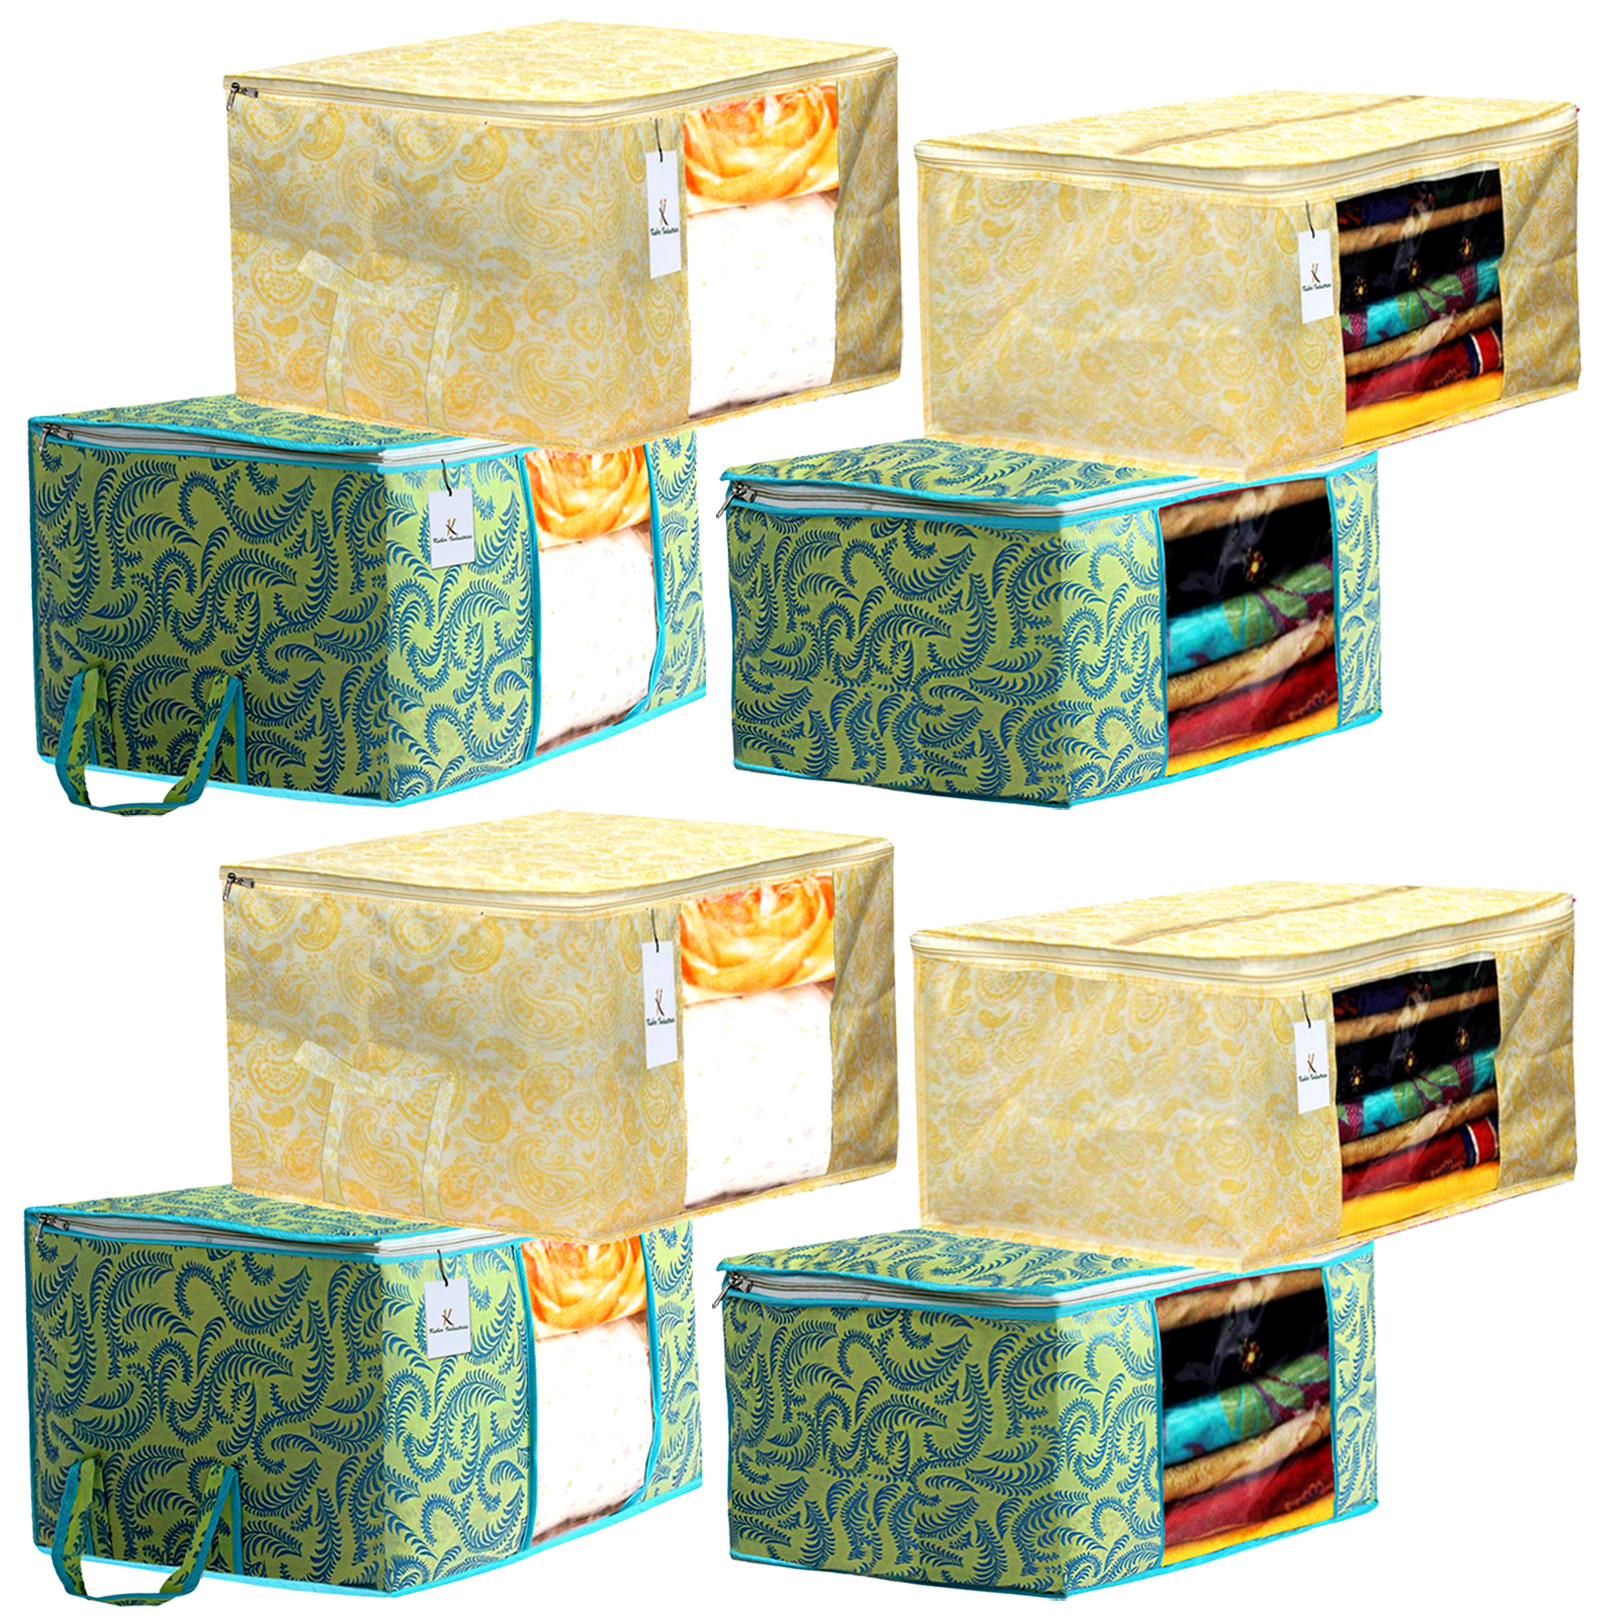 Kuber Industries Metalic Printed Non Woven Saree Cover And Underbed Storage Bag, Storage Organiser, Blanket Cover, Green & Gold -CTKTC42393